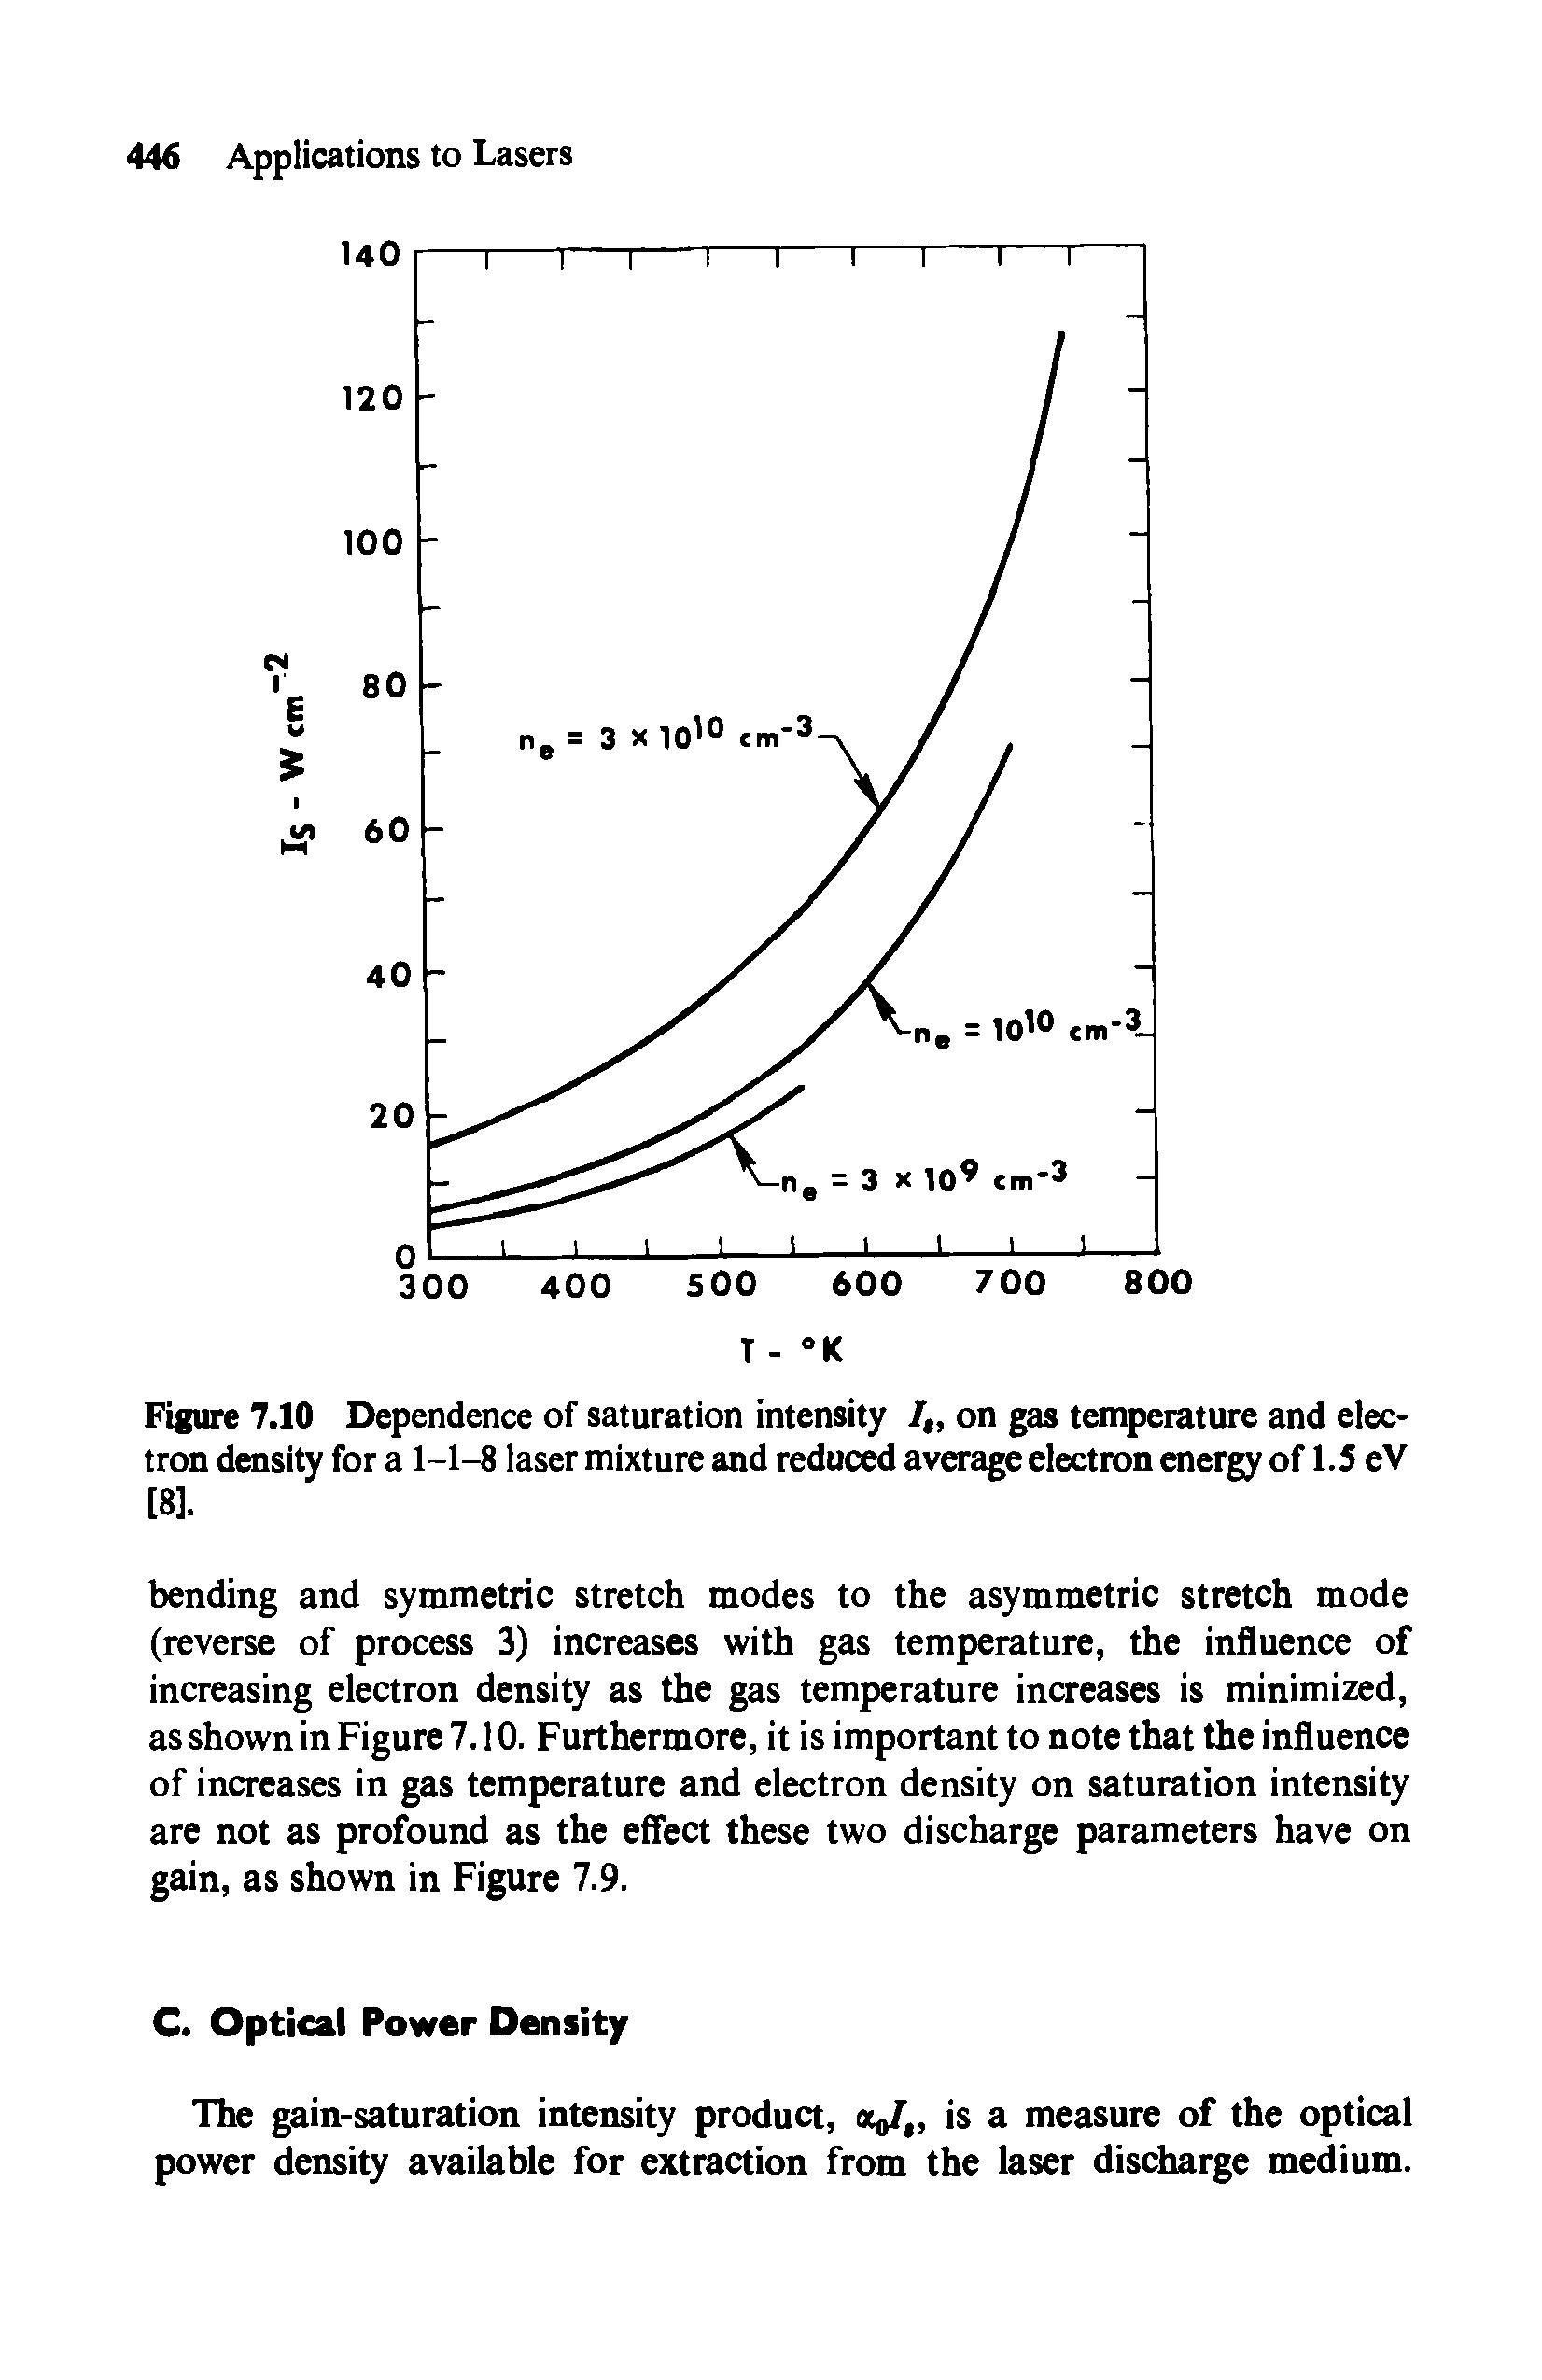 Figure 7.10 Dependence of saturation intensity / on gas temperature and electron density for a 1-1-8 laser mixture and reduced average electron energy of 1.5 eV [8].